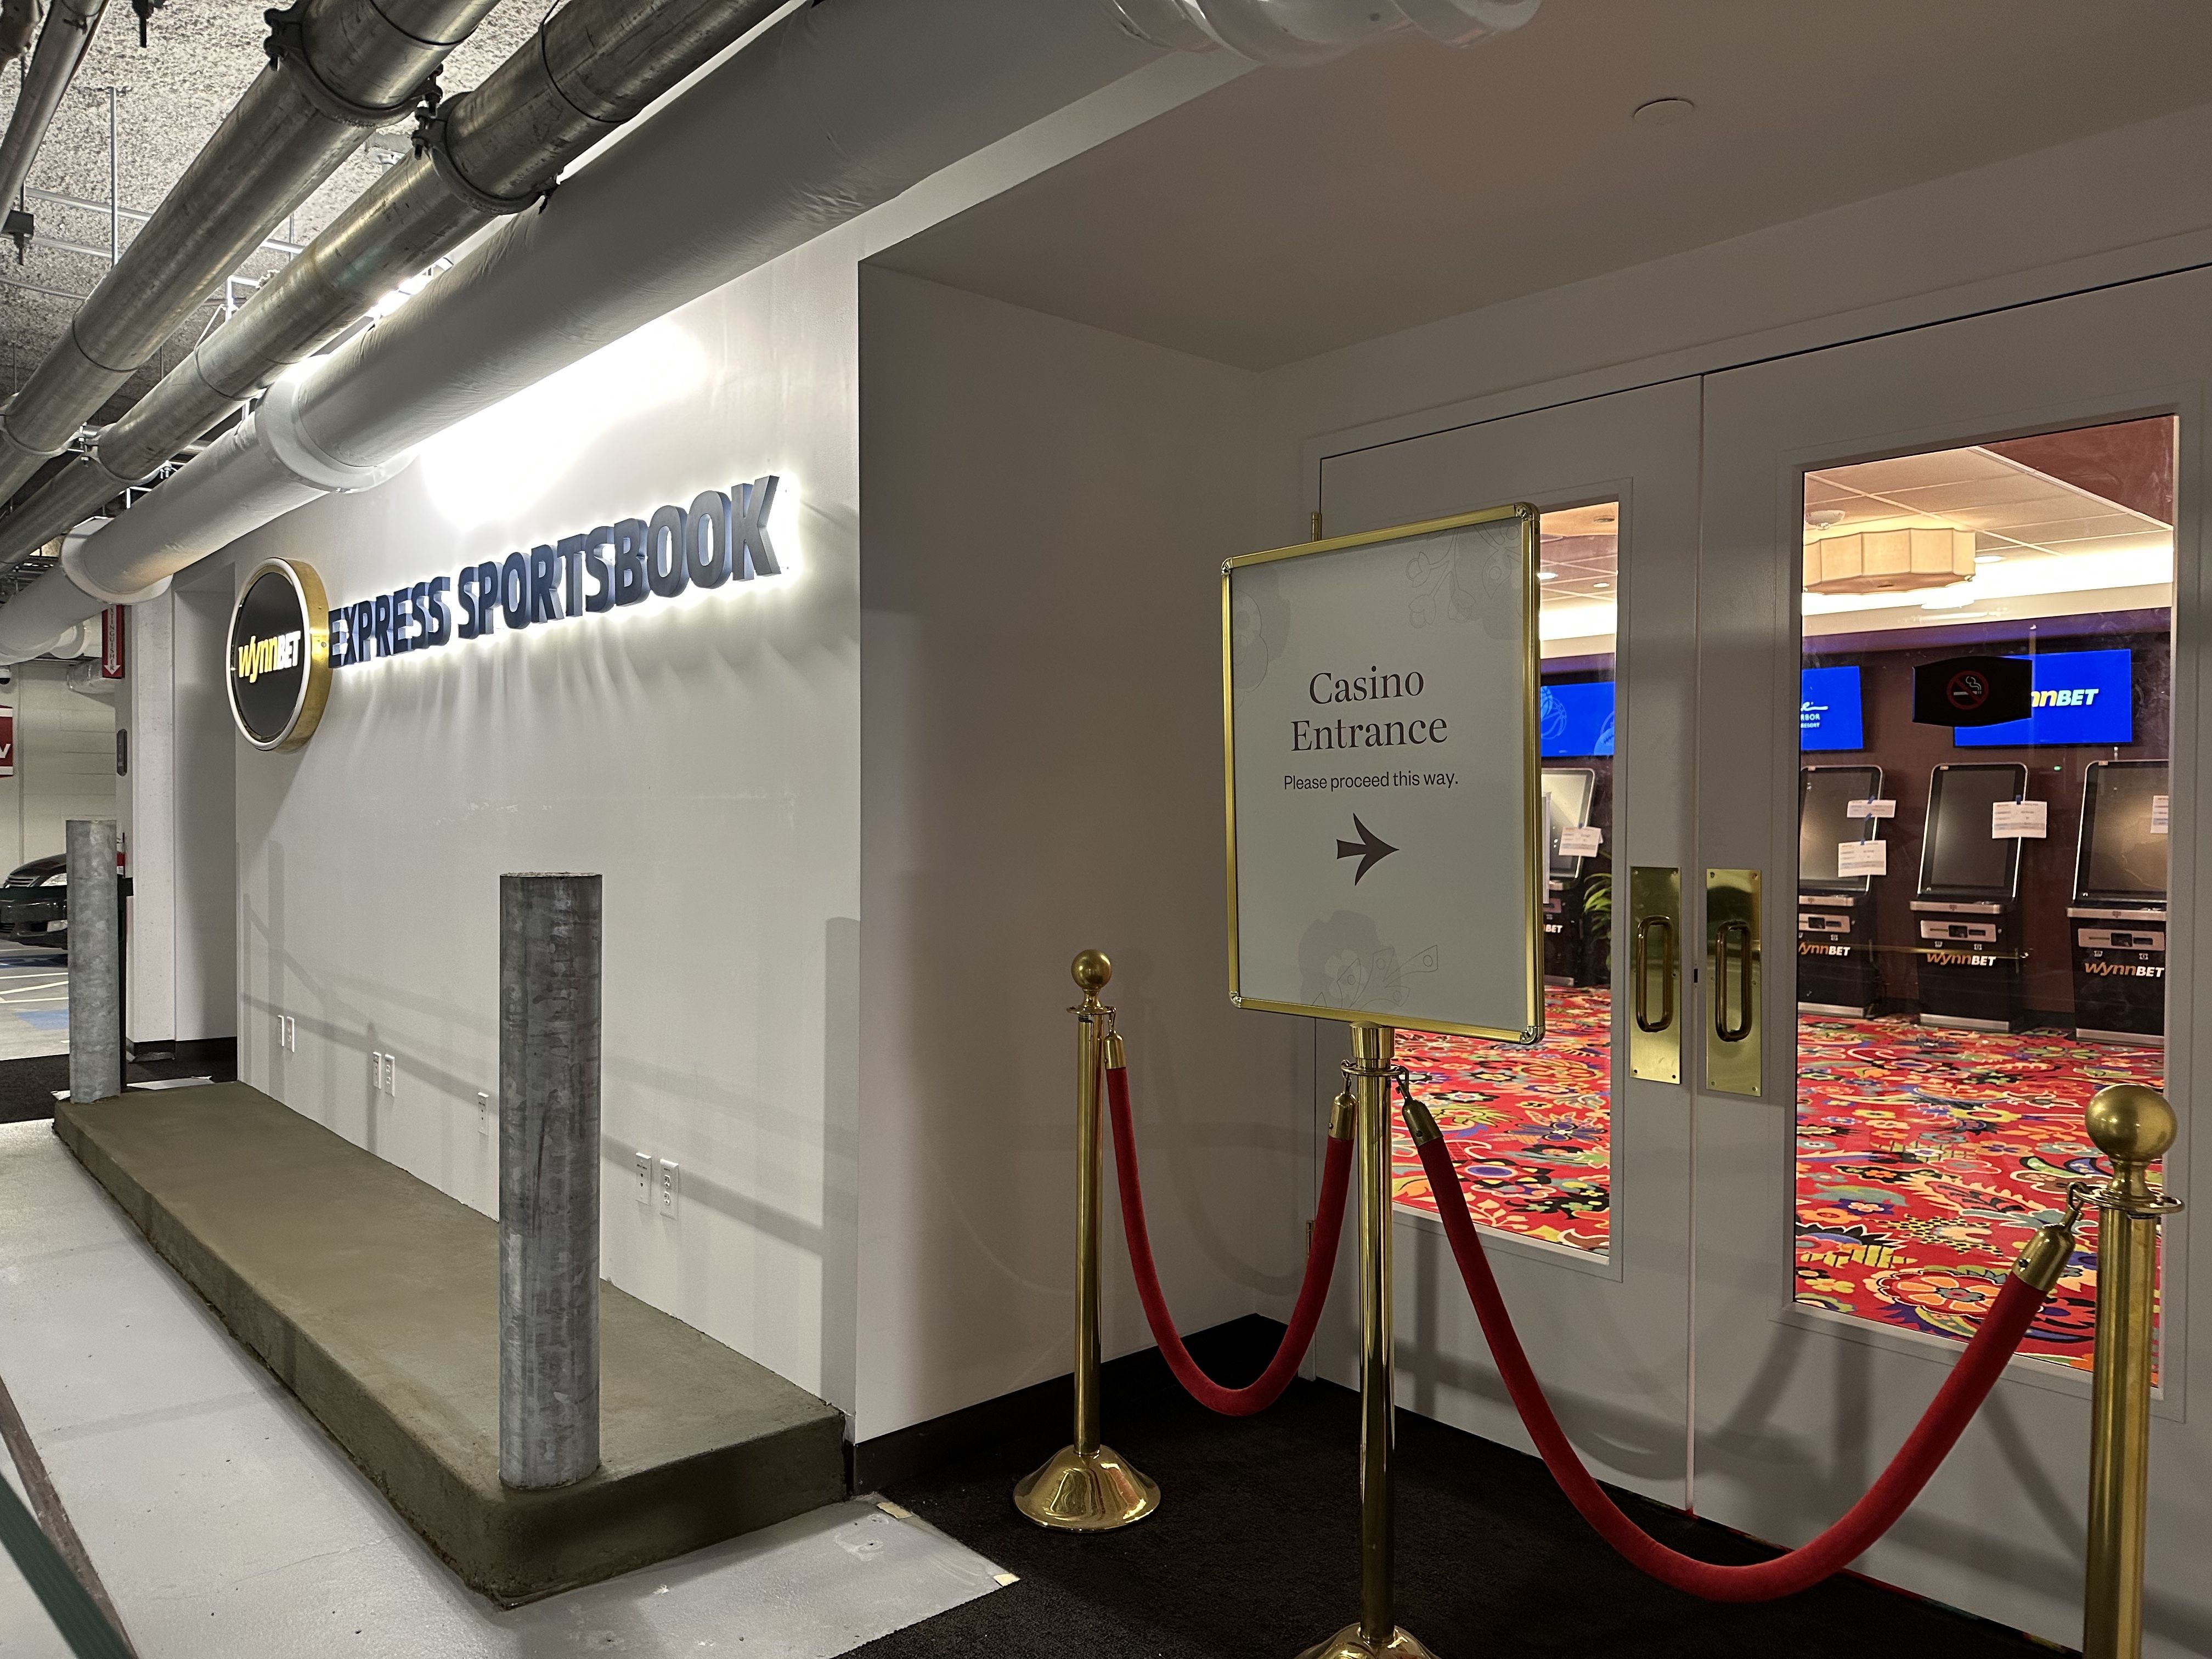 A room in Encore's parking lot has kiosks inside and is called the "WynnBET express sportsbook." It's currently roped off until the Jan. 31 in-person sports betting launch.